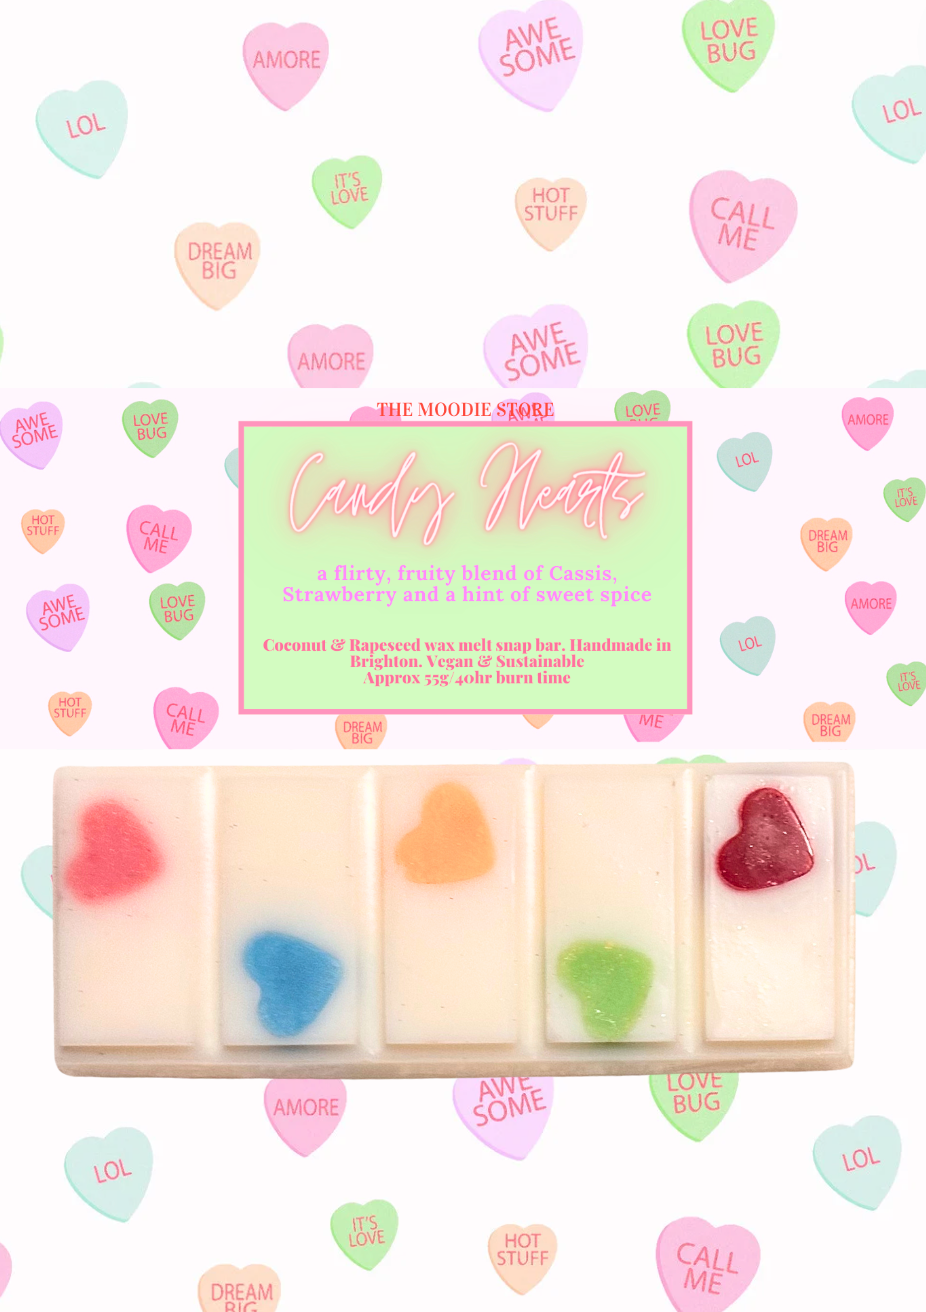 Valentines Special - Candy Hearts Coconut & Rapeseed snap bar